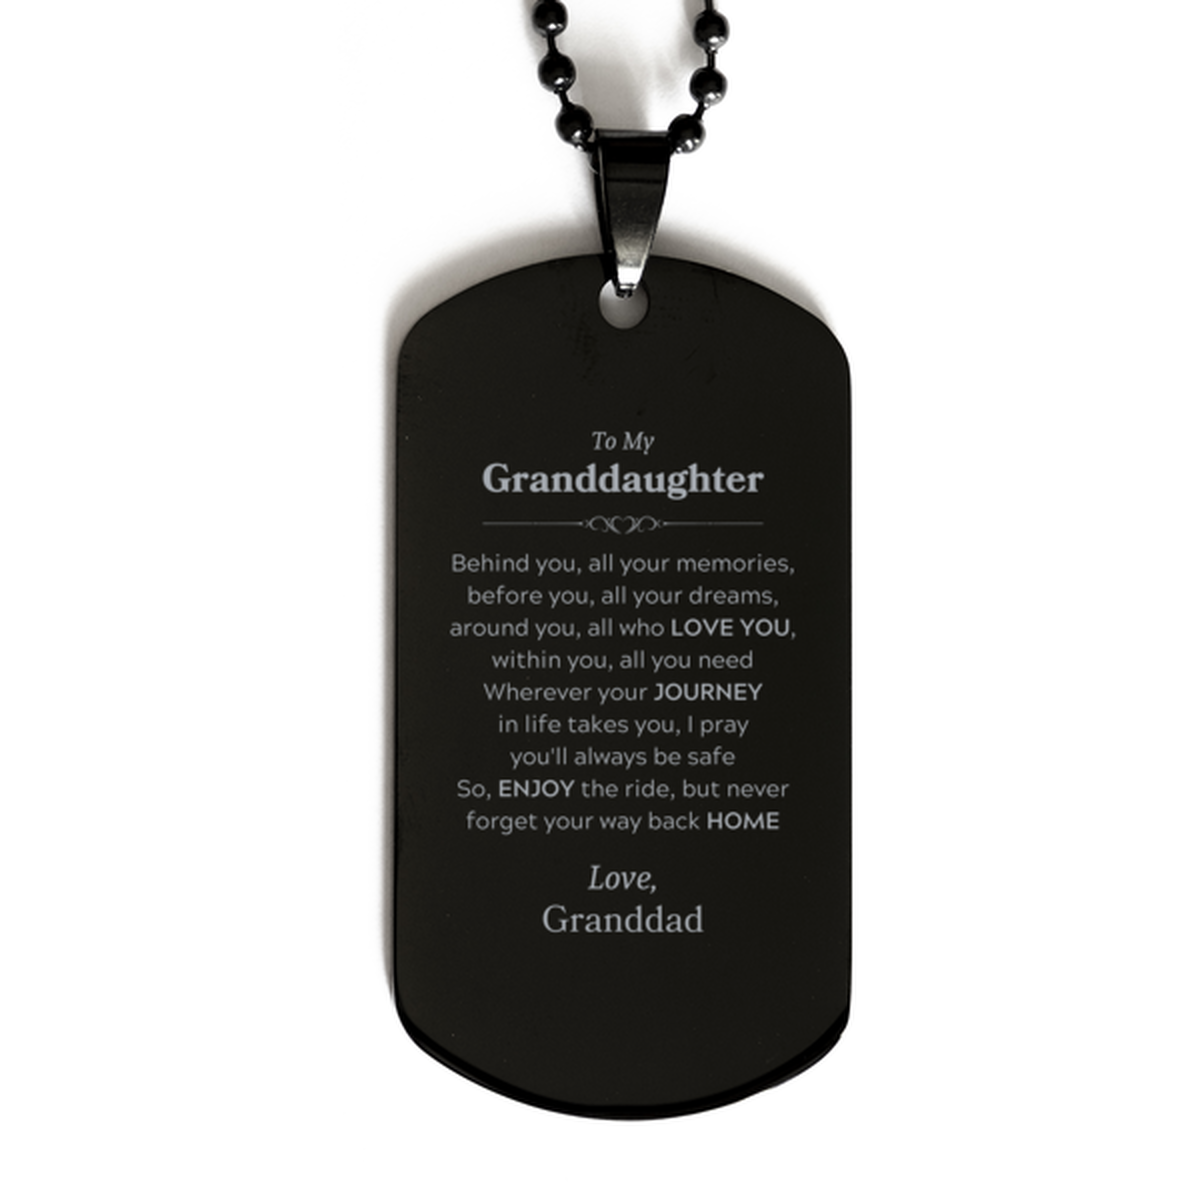 To My Granddaughter Graduation Gifts from Granddad, Granddaughter Black Dog Tag Christmas Birthday Gifts for Granddaughter Behind you, all your memories, before you, all your dreams. Love, Granddad